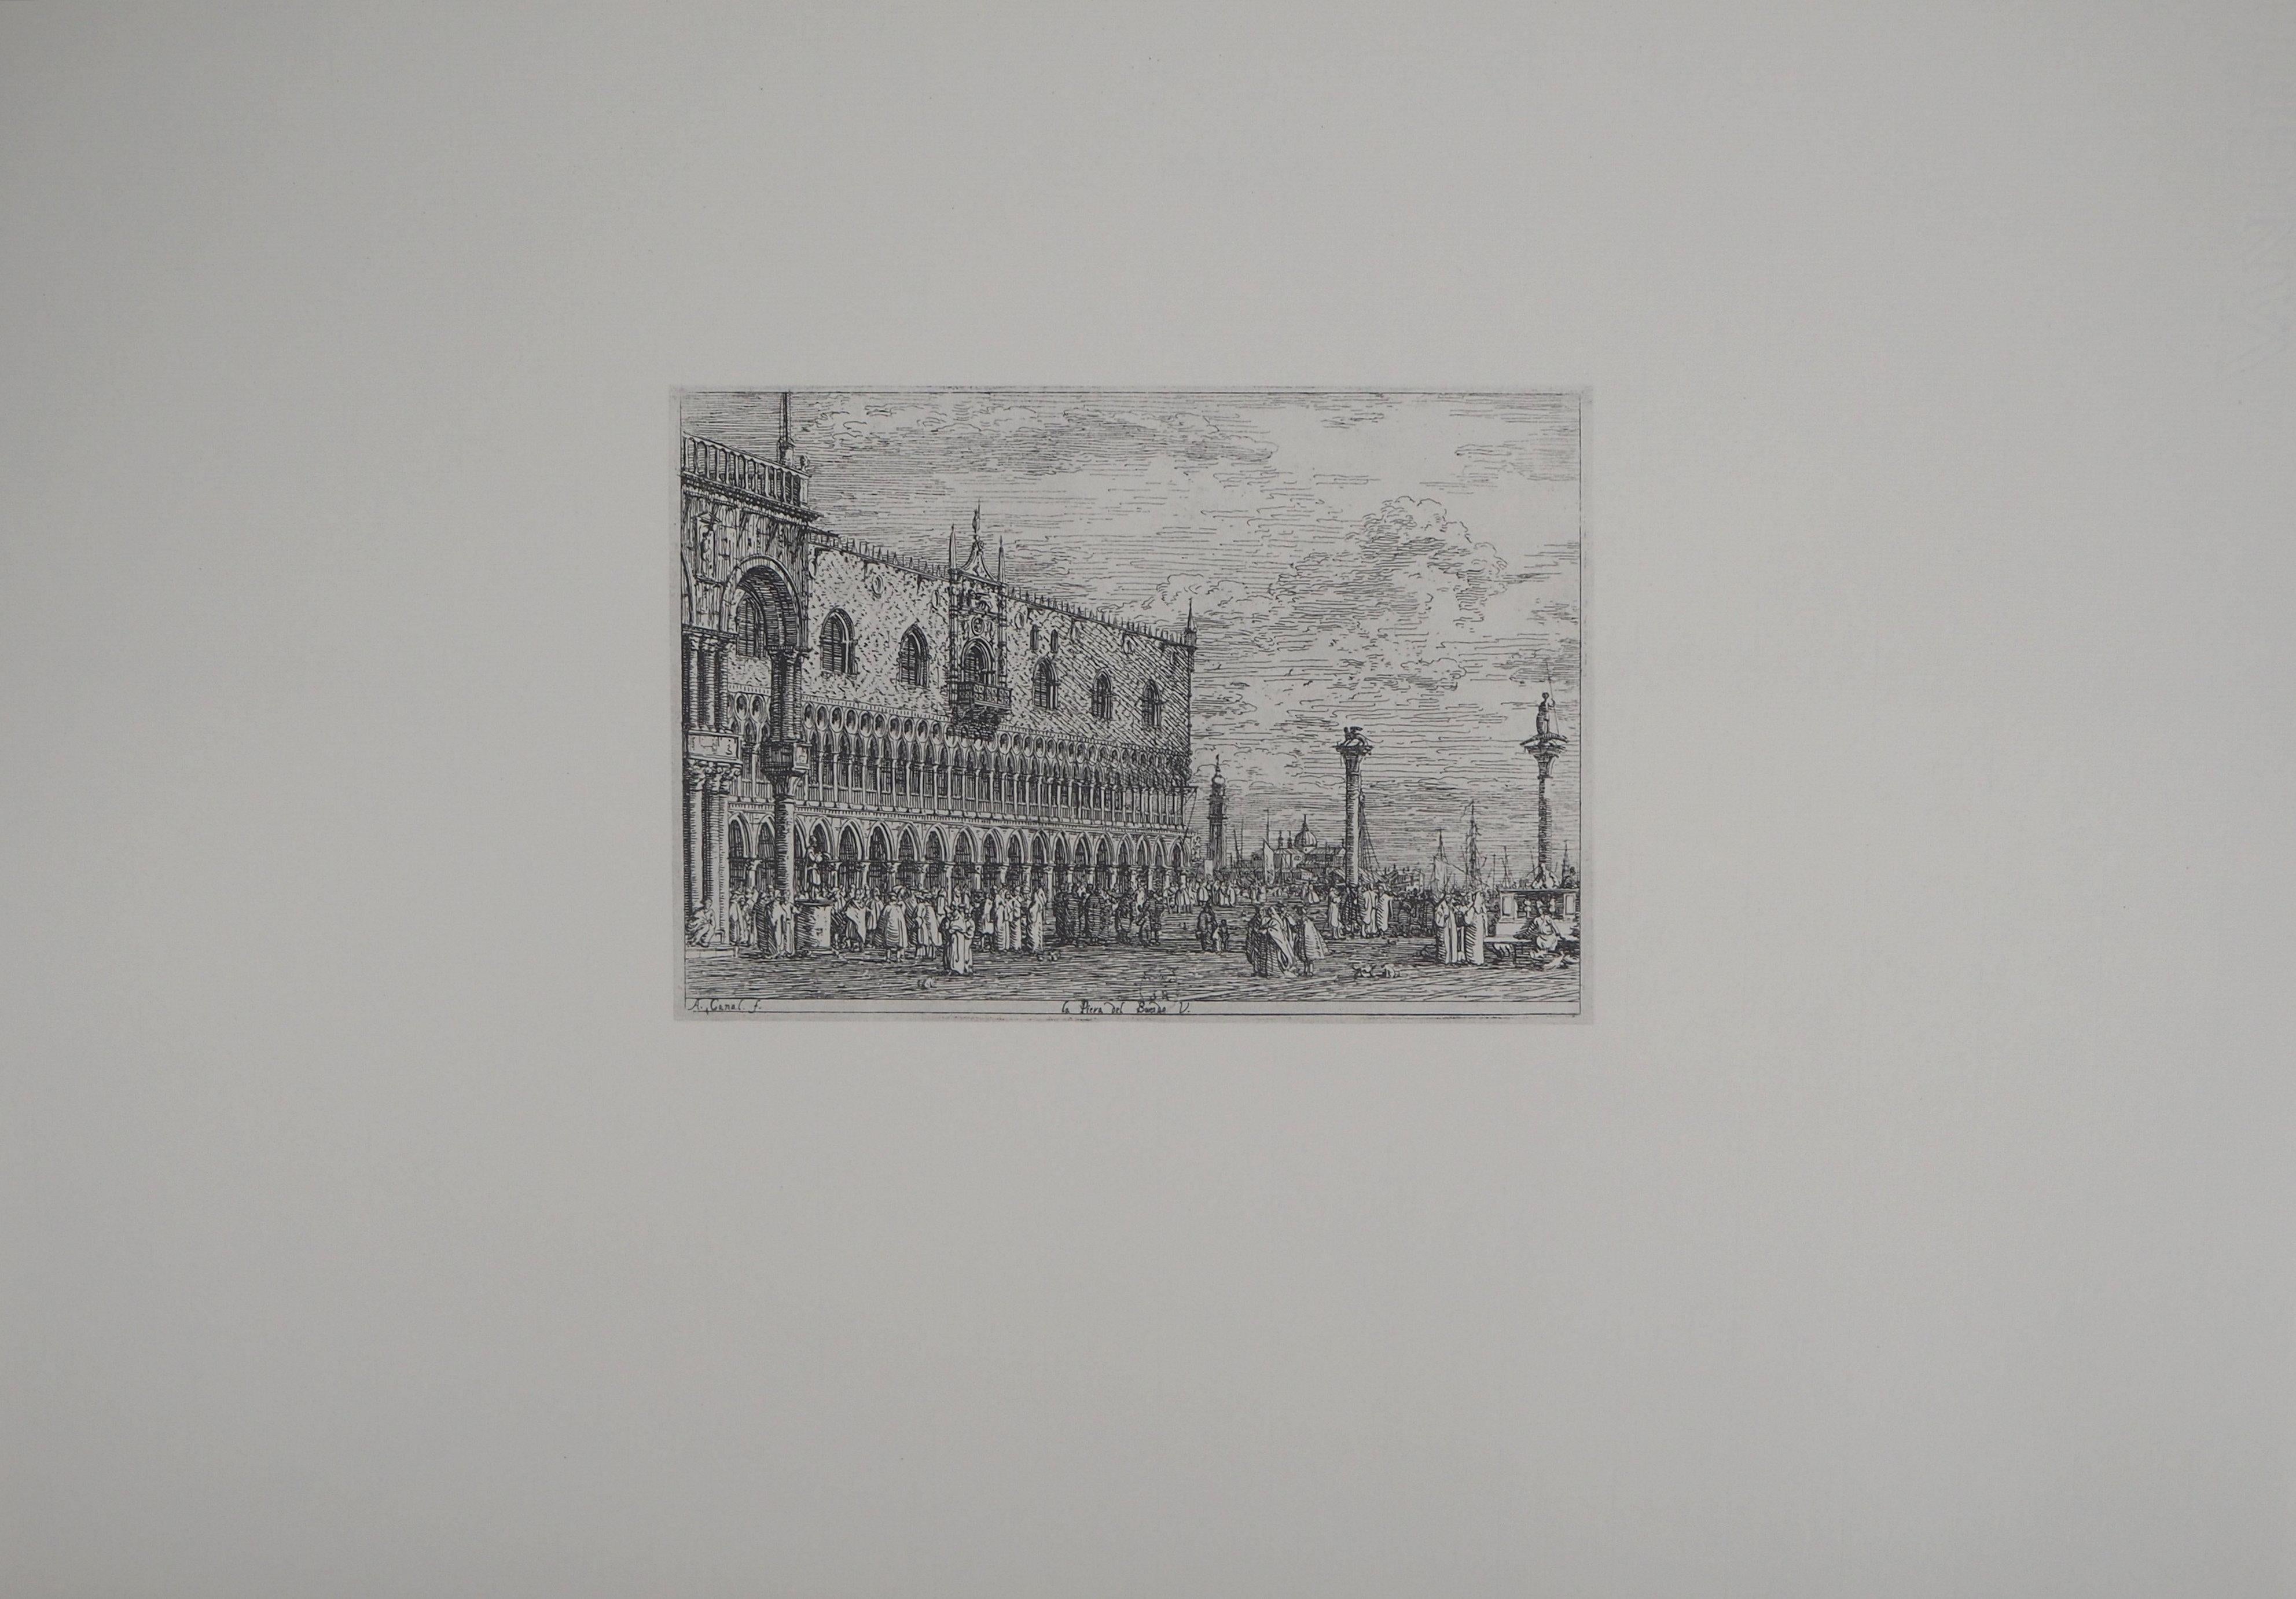 Venice: Ducal Palace - Héliogravure, 1975 - Print by Giovanni Antonio Canal (Canaletto)